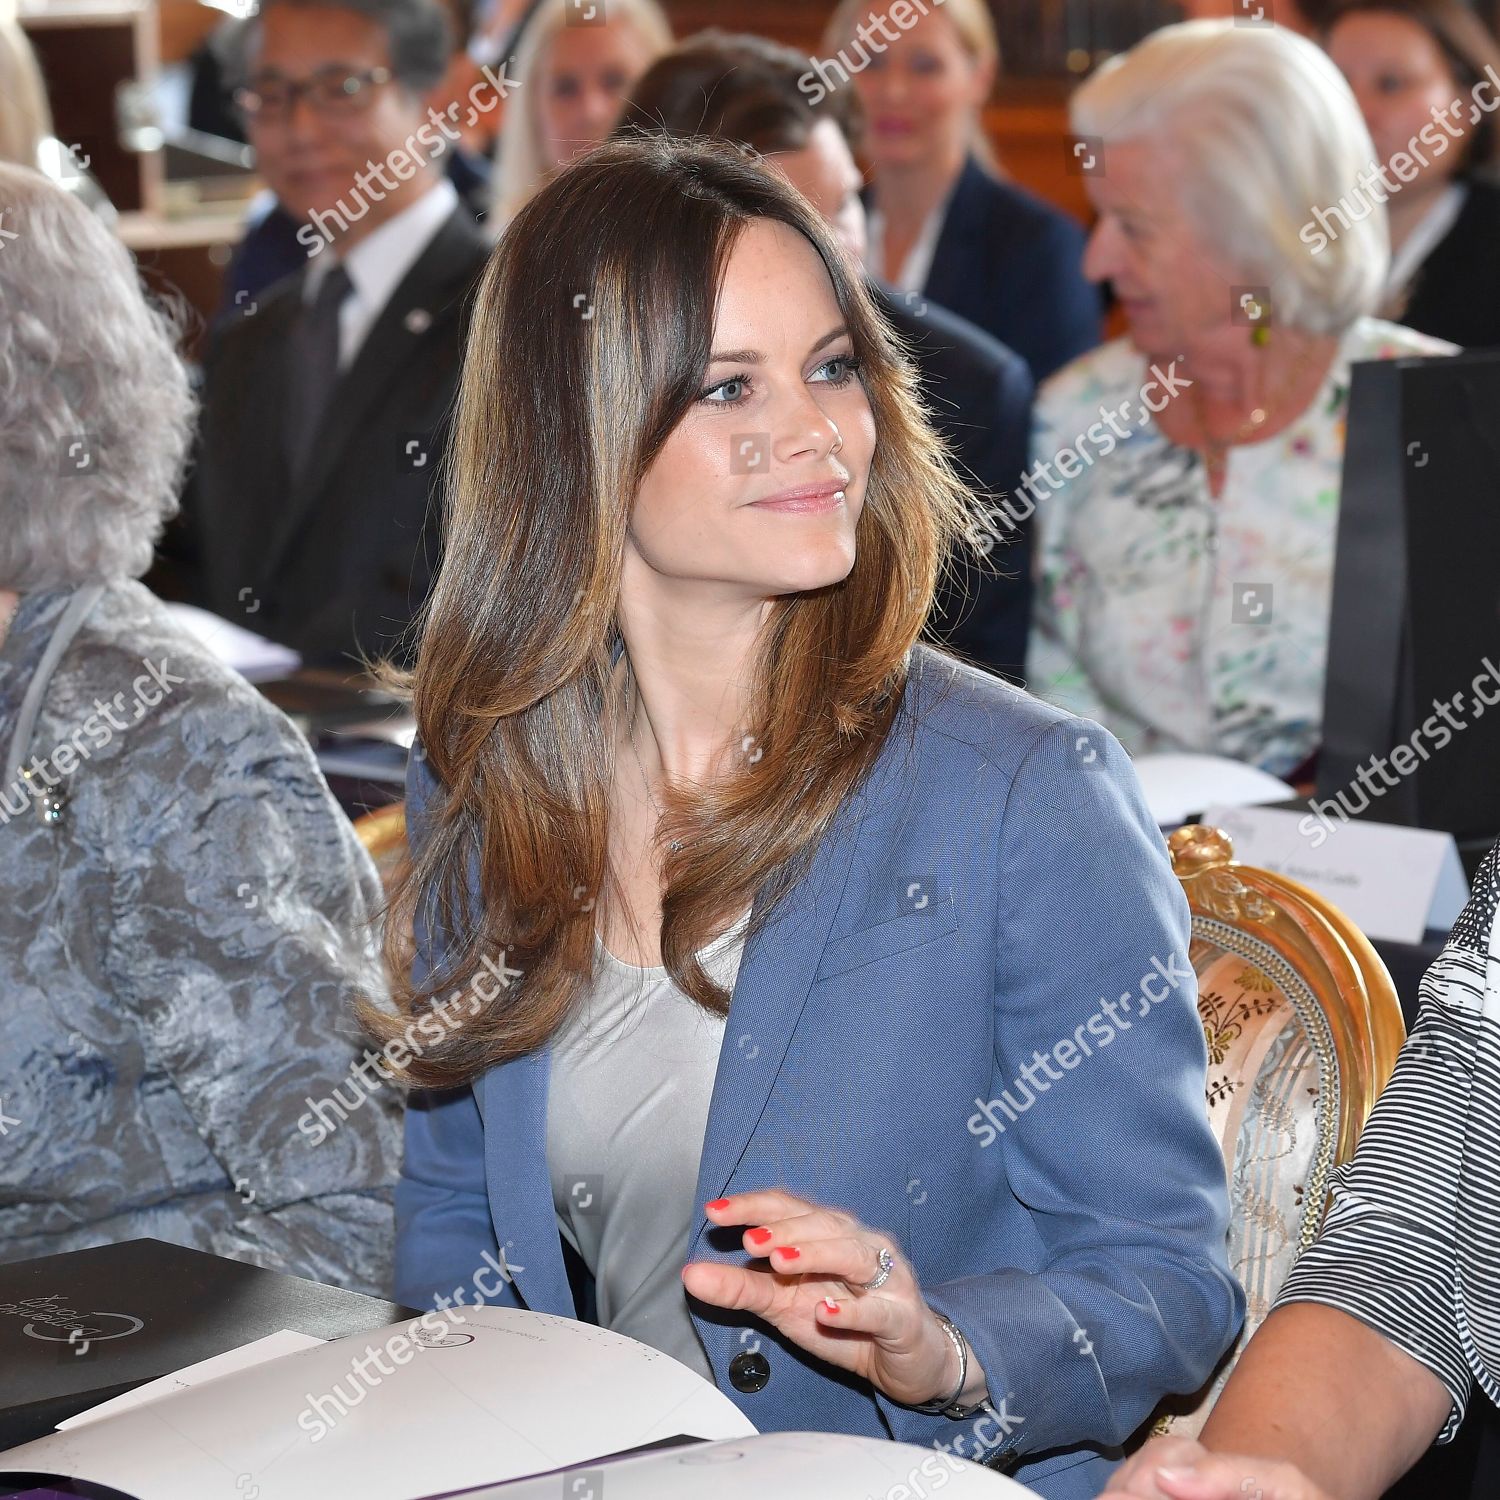 dementia-forum-x-at-the-royal-palace-stockholm-sweden-shutterstock-editorial-10237450h.jpg